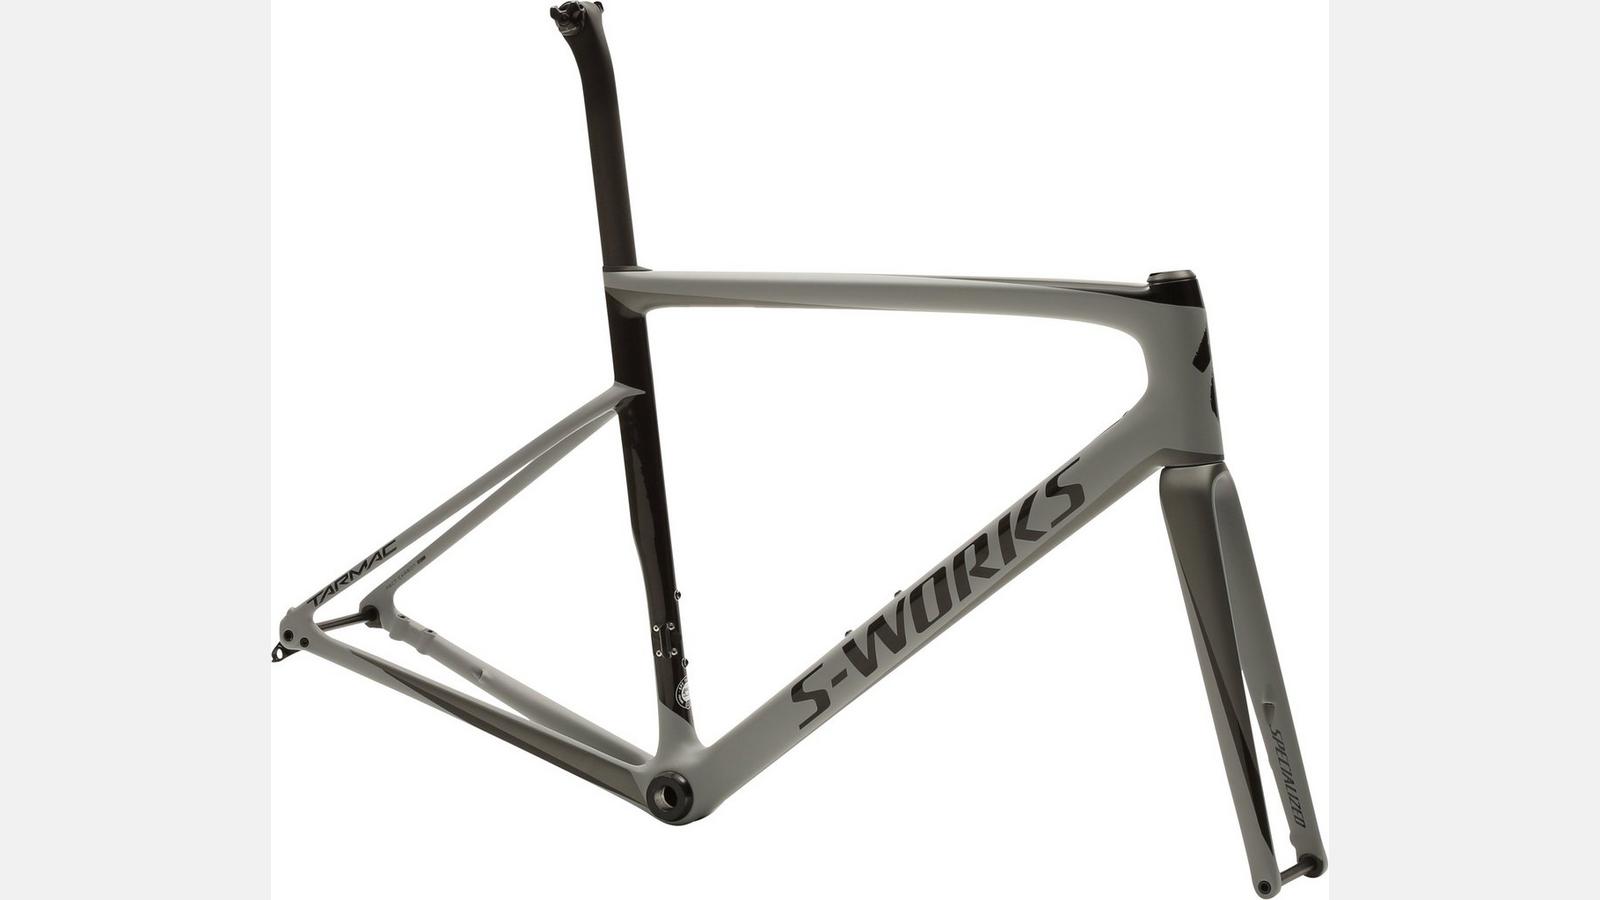 Paint for 2018 Specialized S-Works Tarmac Disc Frameset - Satin Cool Grey